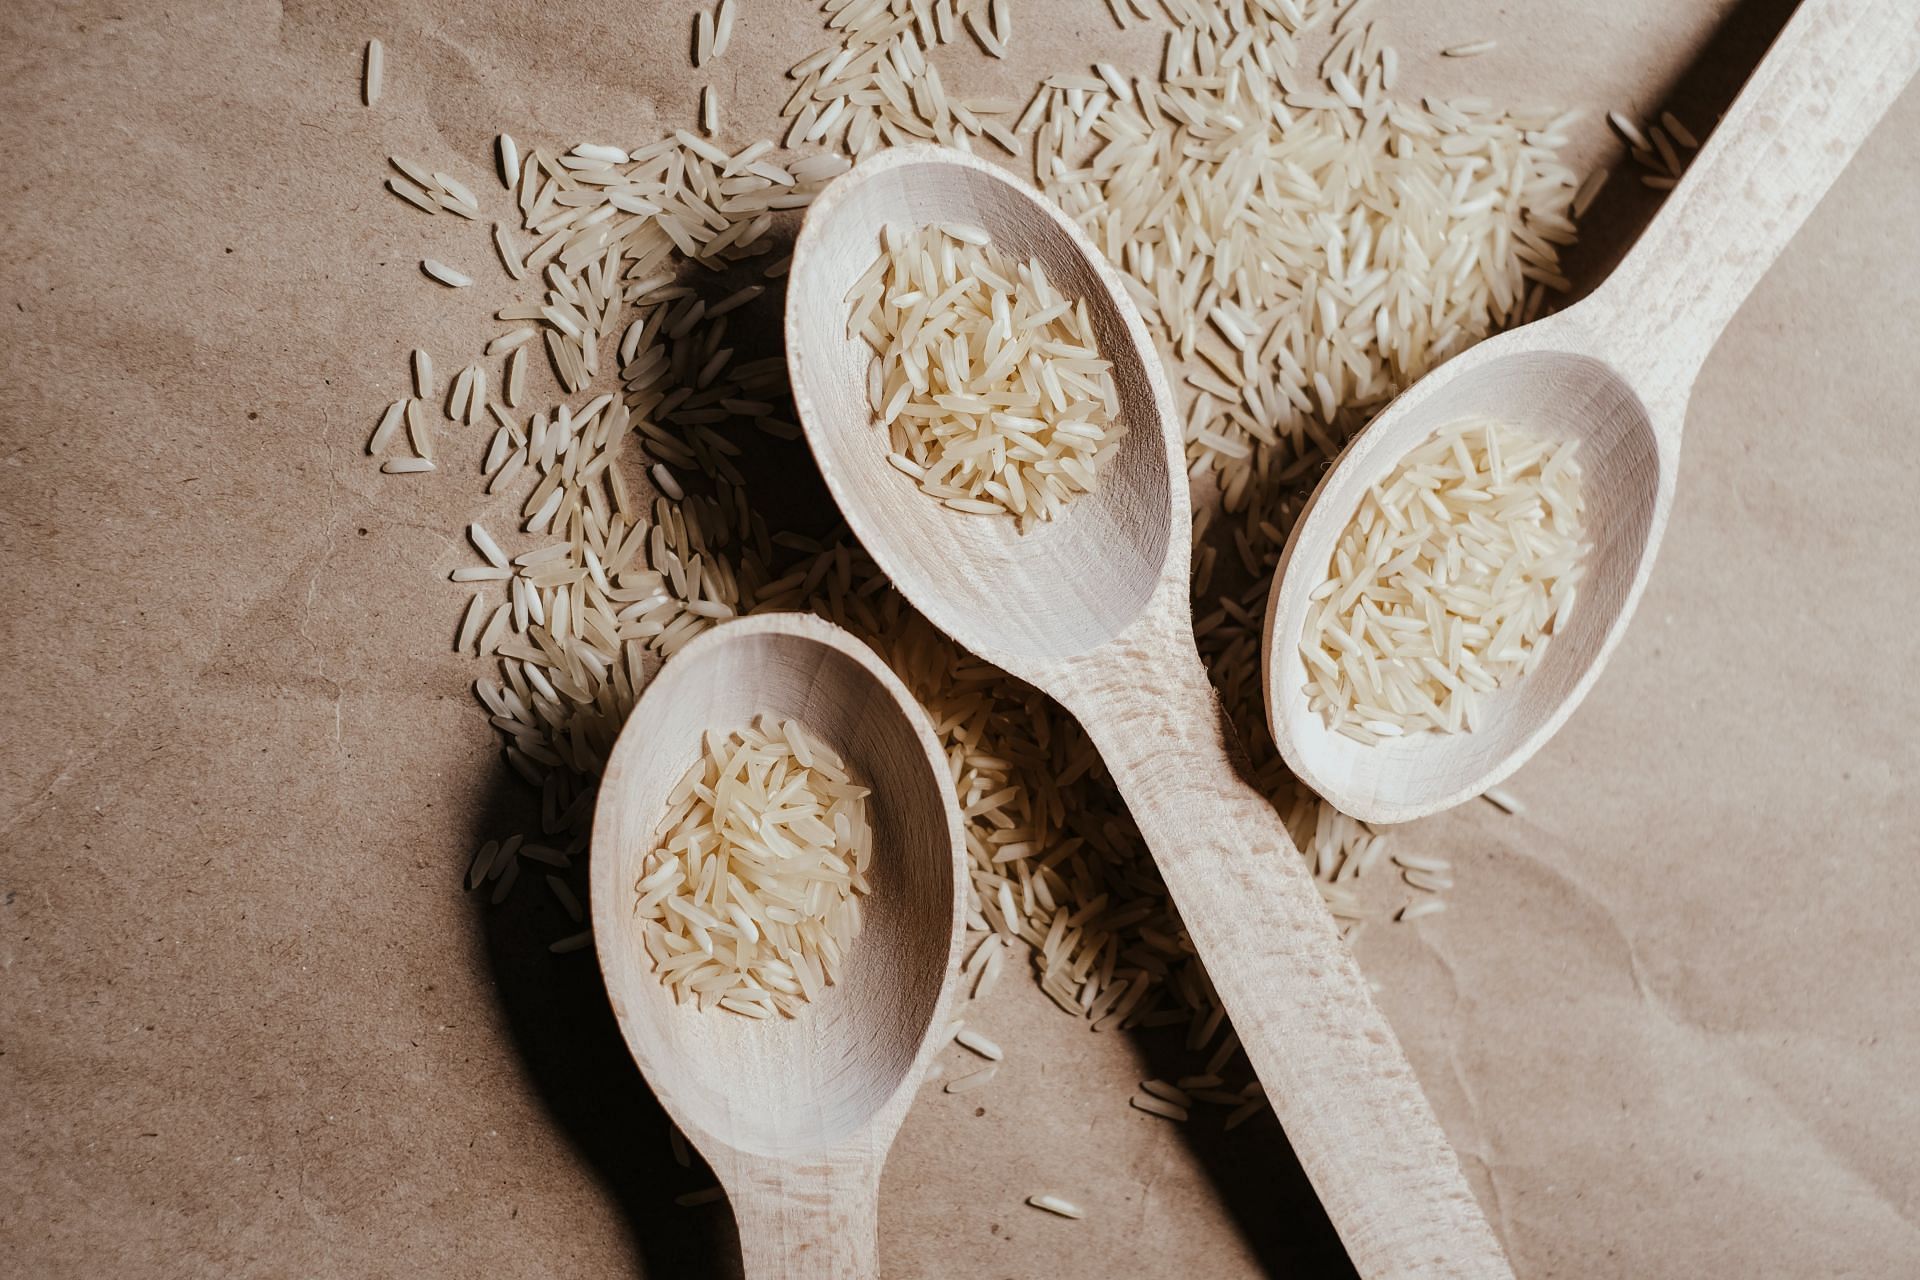 Rice hack to lose weight(image sourced via Pexels / Photo by Freestocksrg)